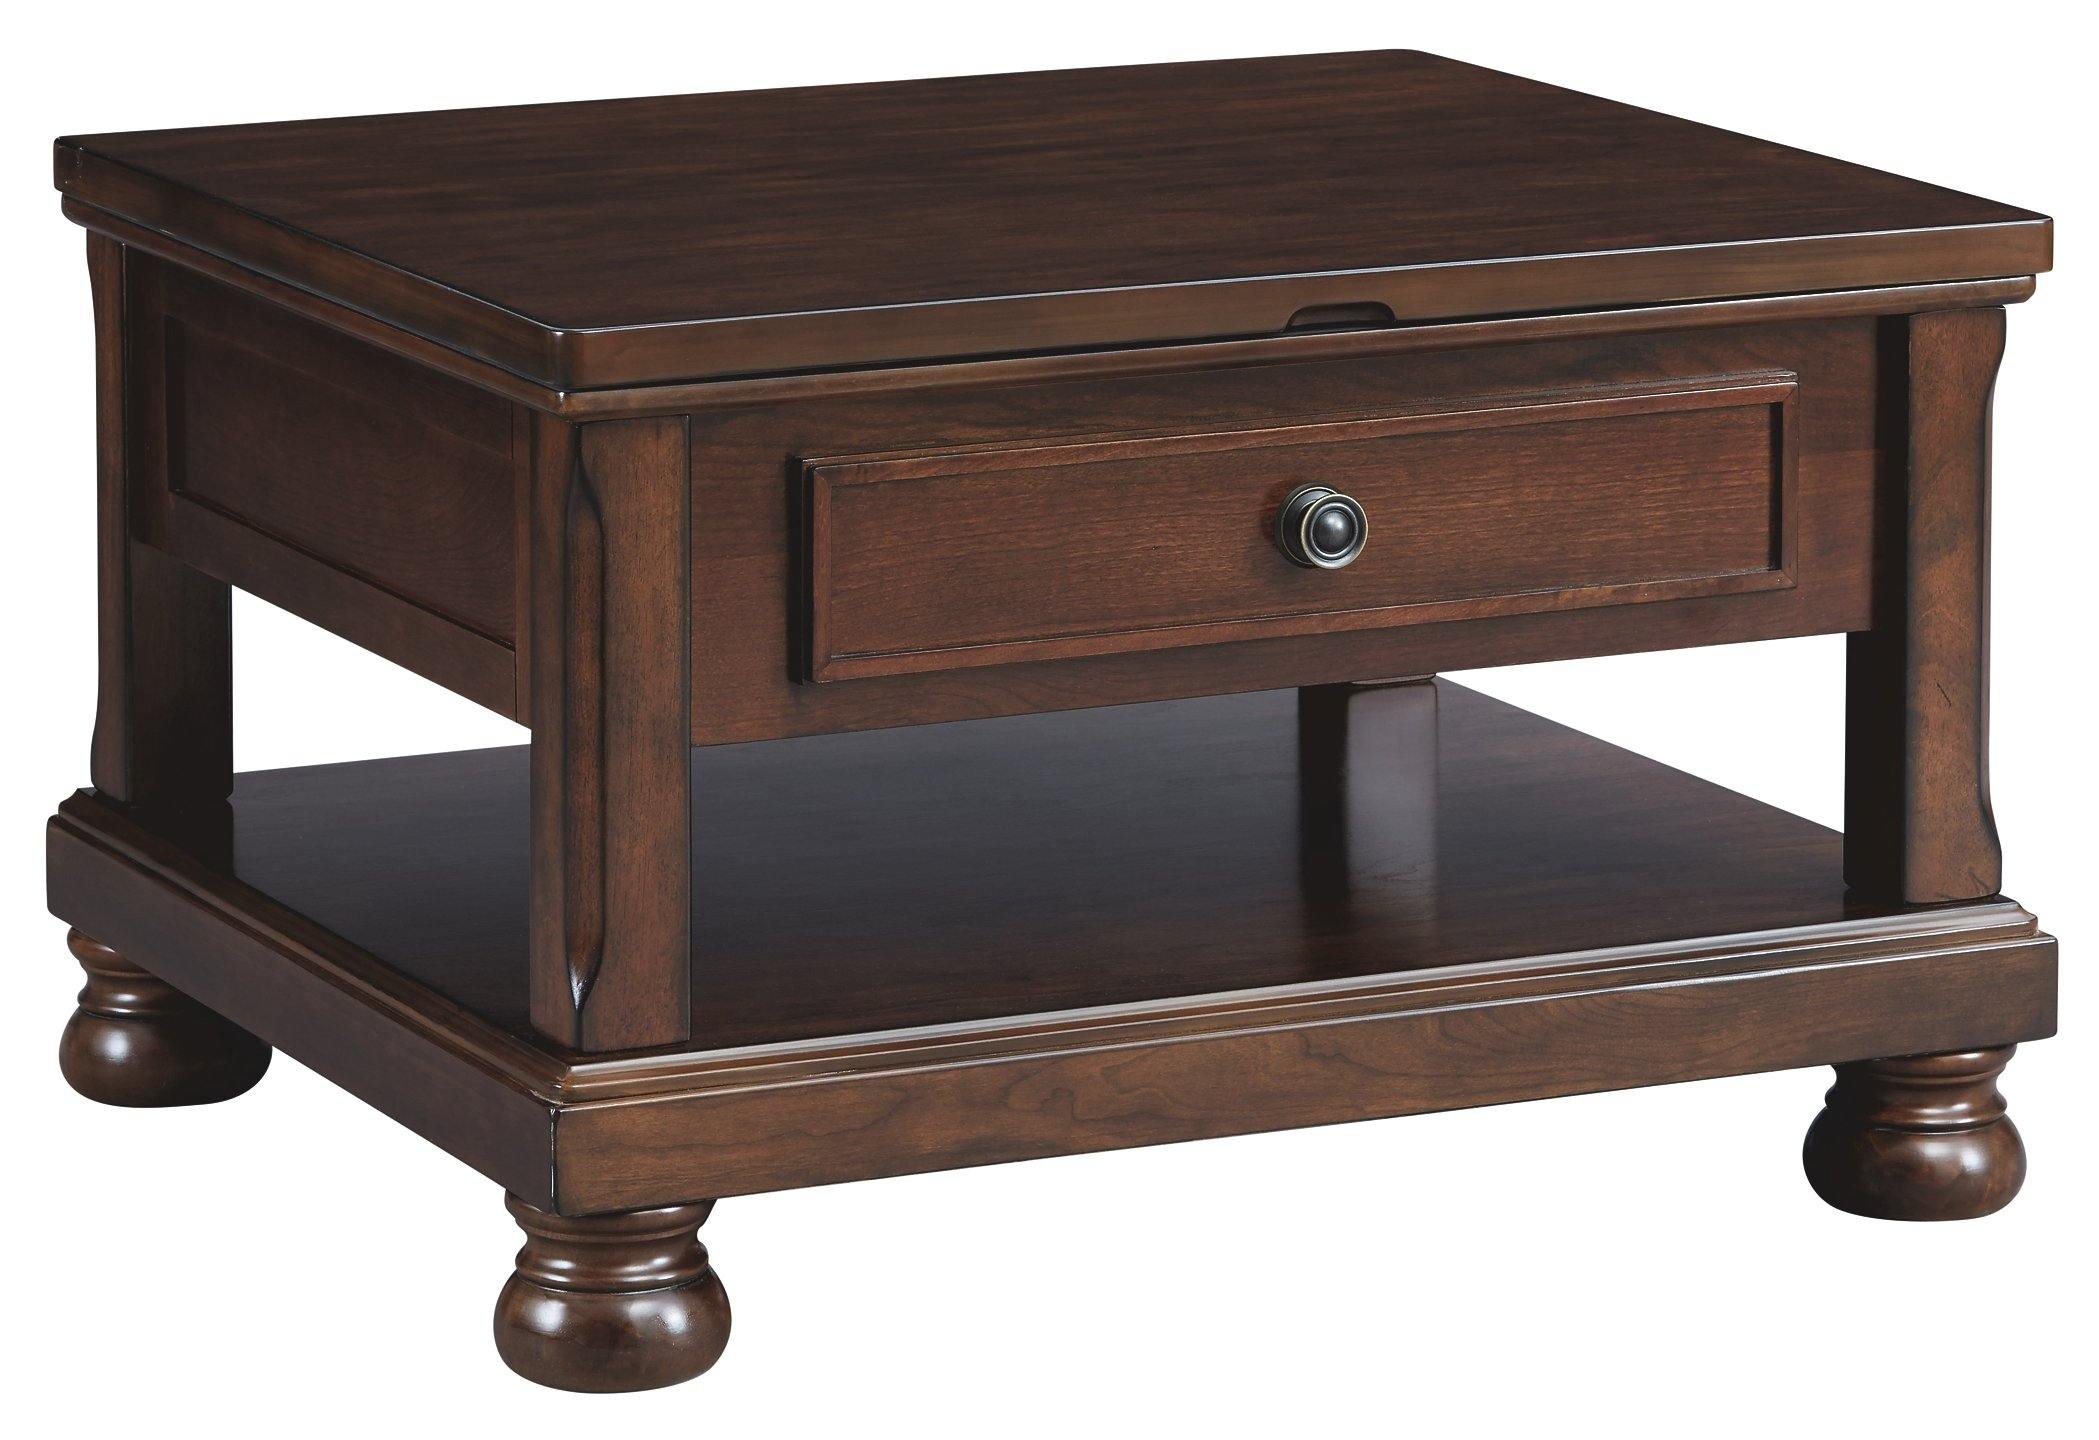 Porter Coffee Table with Lift Top T697-0 Motion Occasionals By ashley - sofafair.com